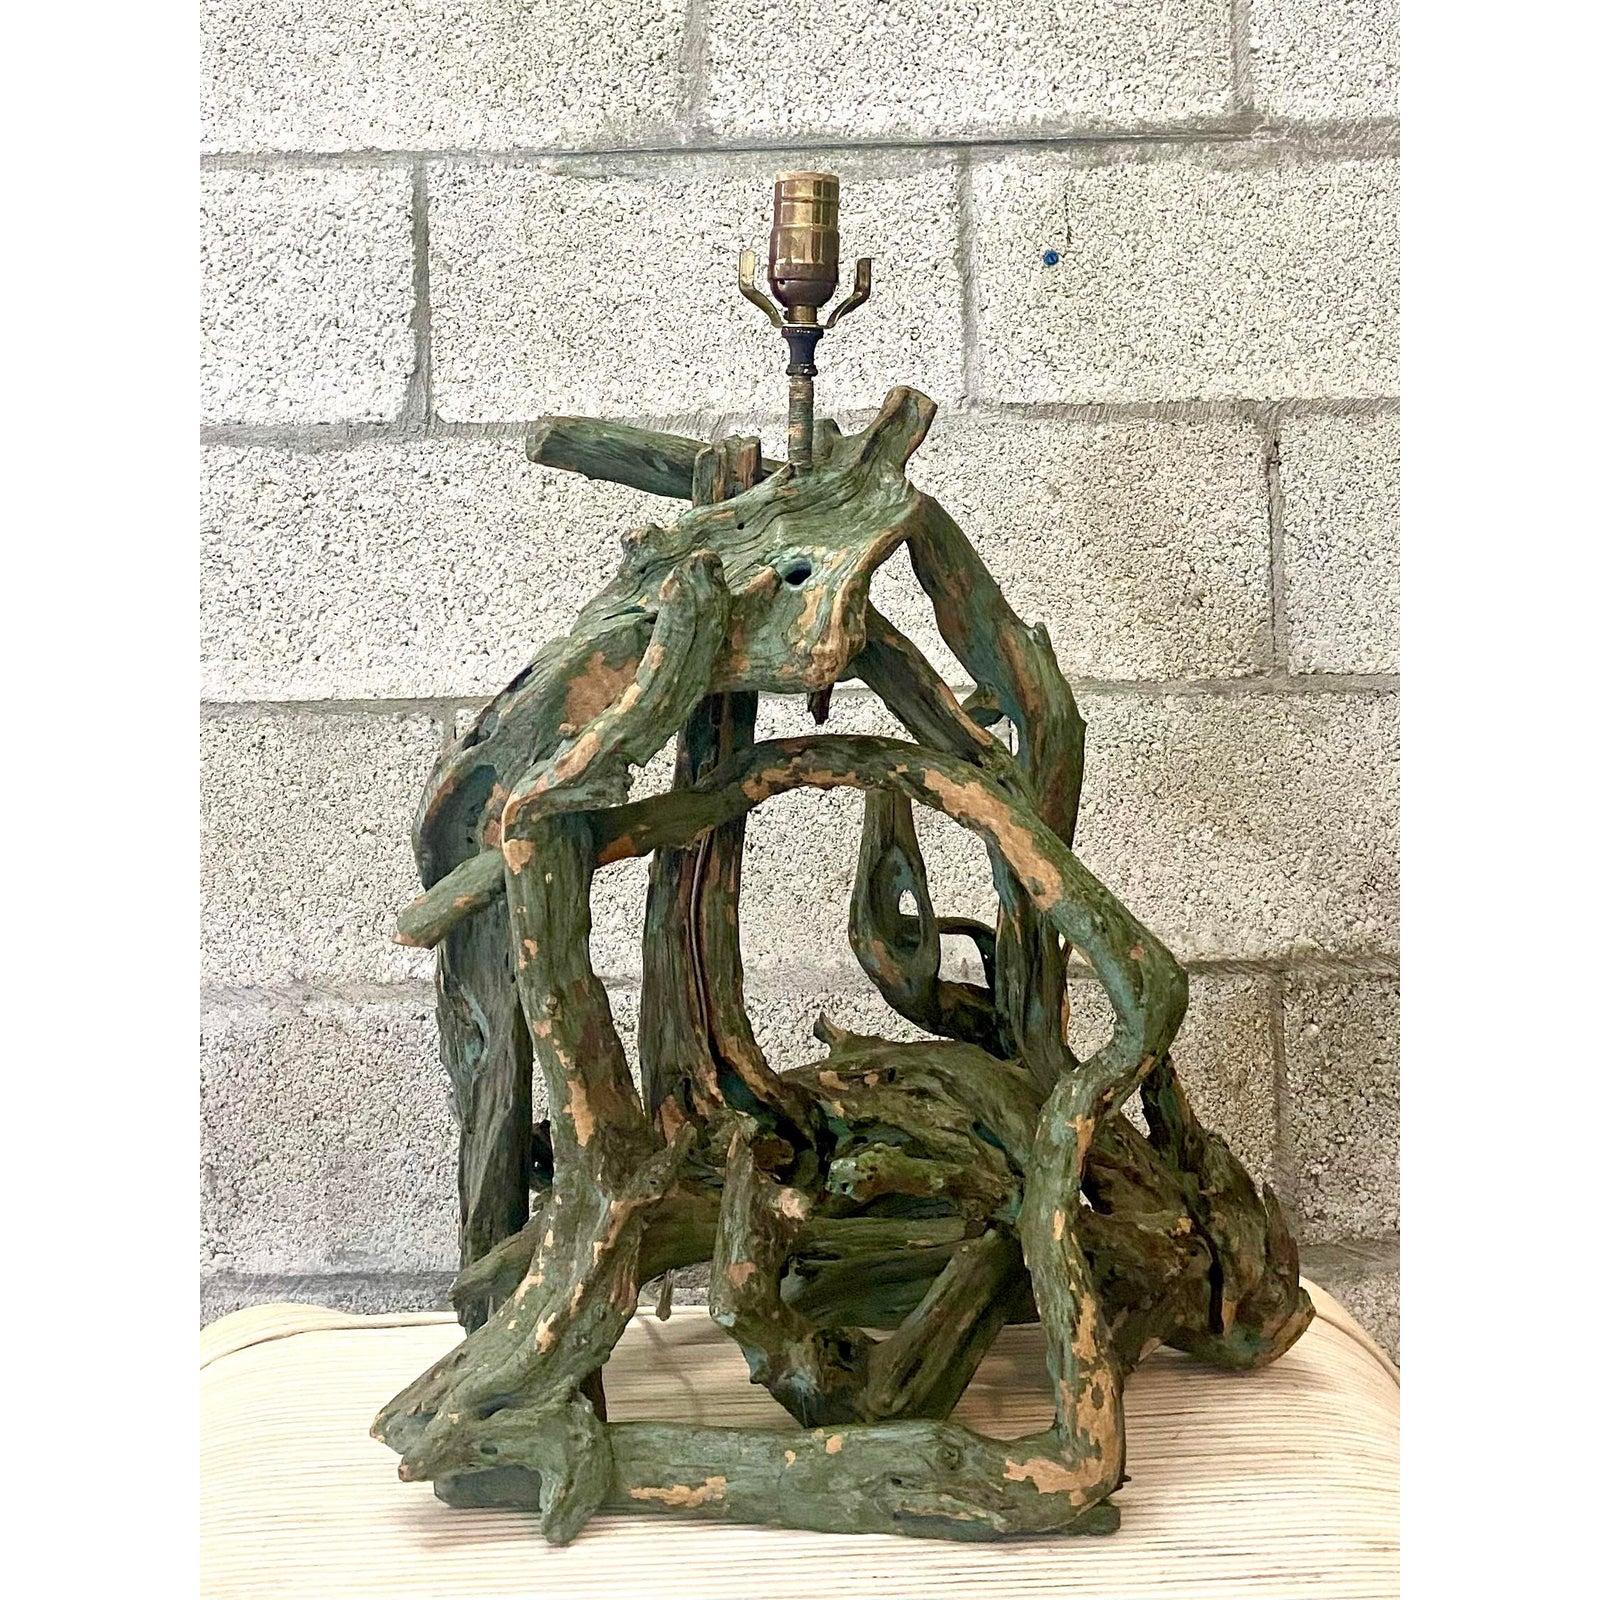 Fantastic vintage Coastal drift wood lamp. Time has made this the perfect addition to any coastal decor. A beautiful faded green worn just the right amount. Fully restored with all new wiring and hardware. Acquired from a Palm Beach estate.